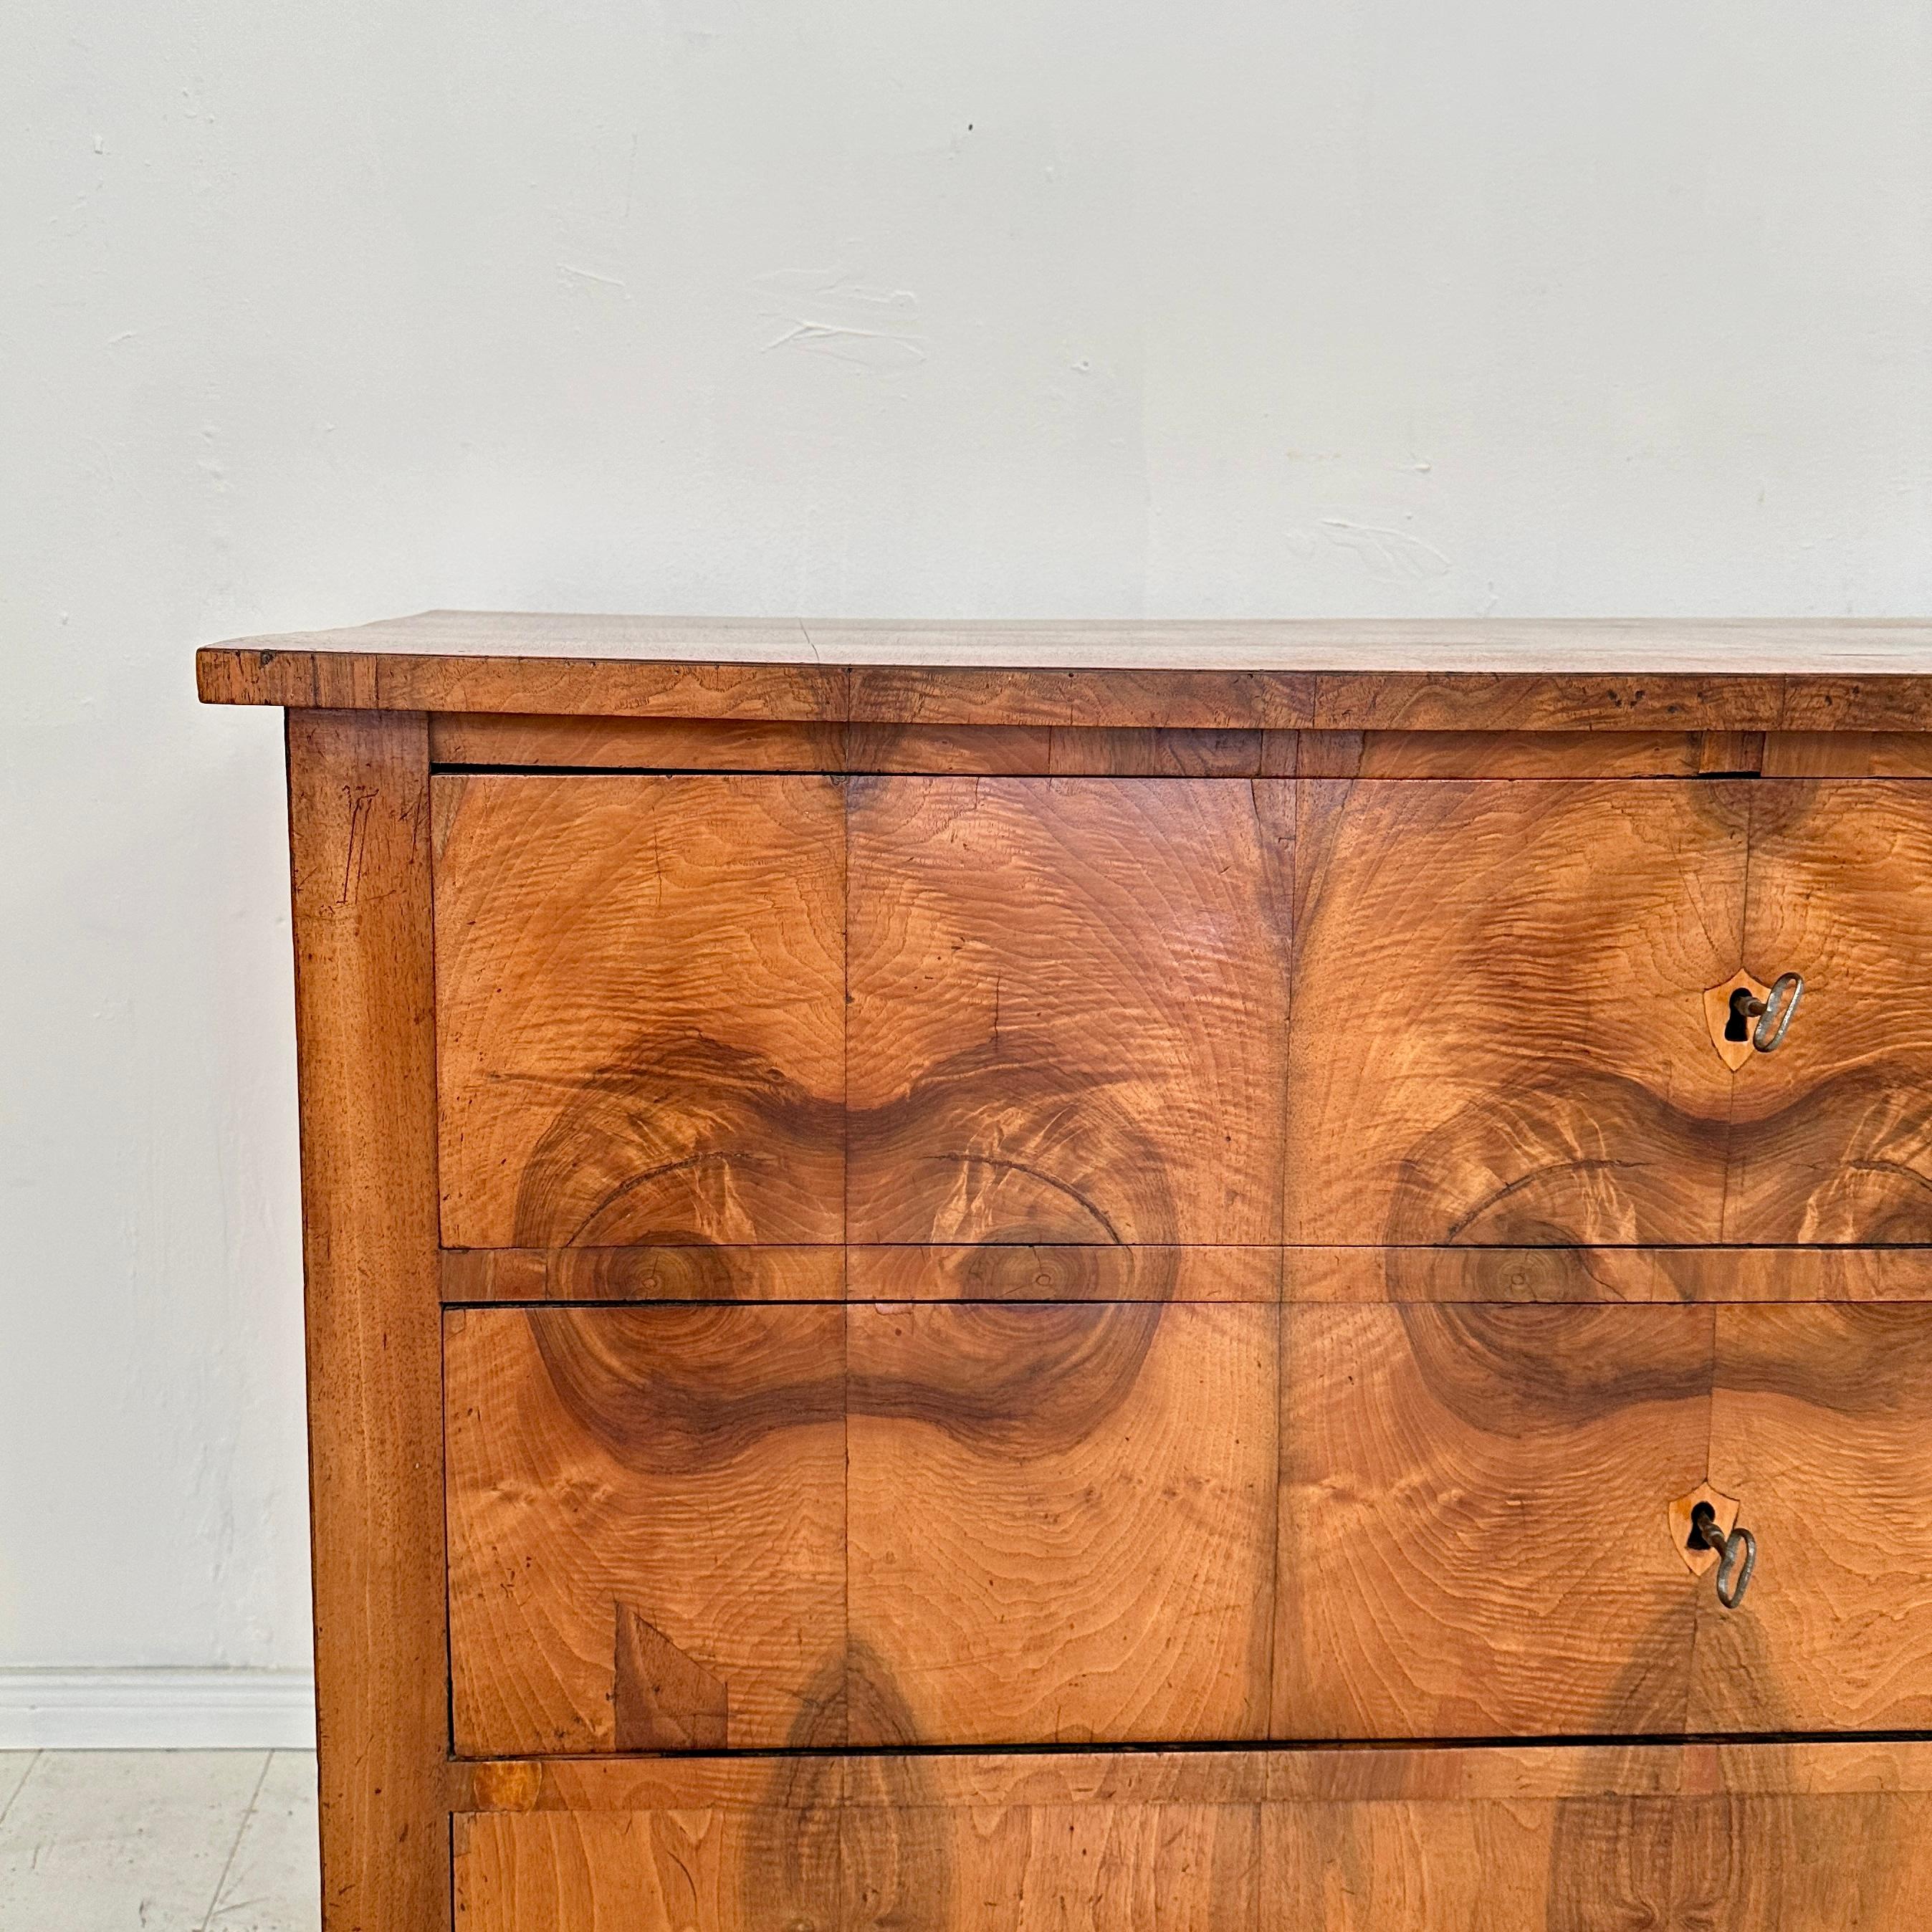 19th Century German Biedermeier Chest of Drawers in Walnut with 3 Drawers, 1820 For Sale 2